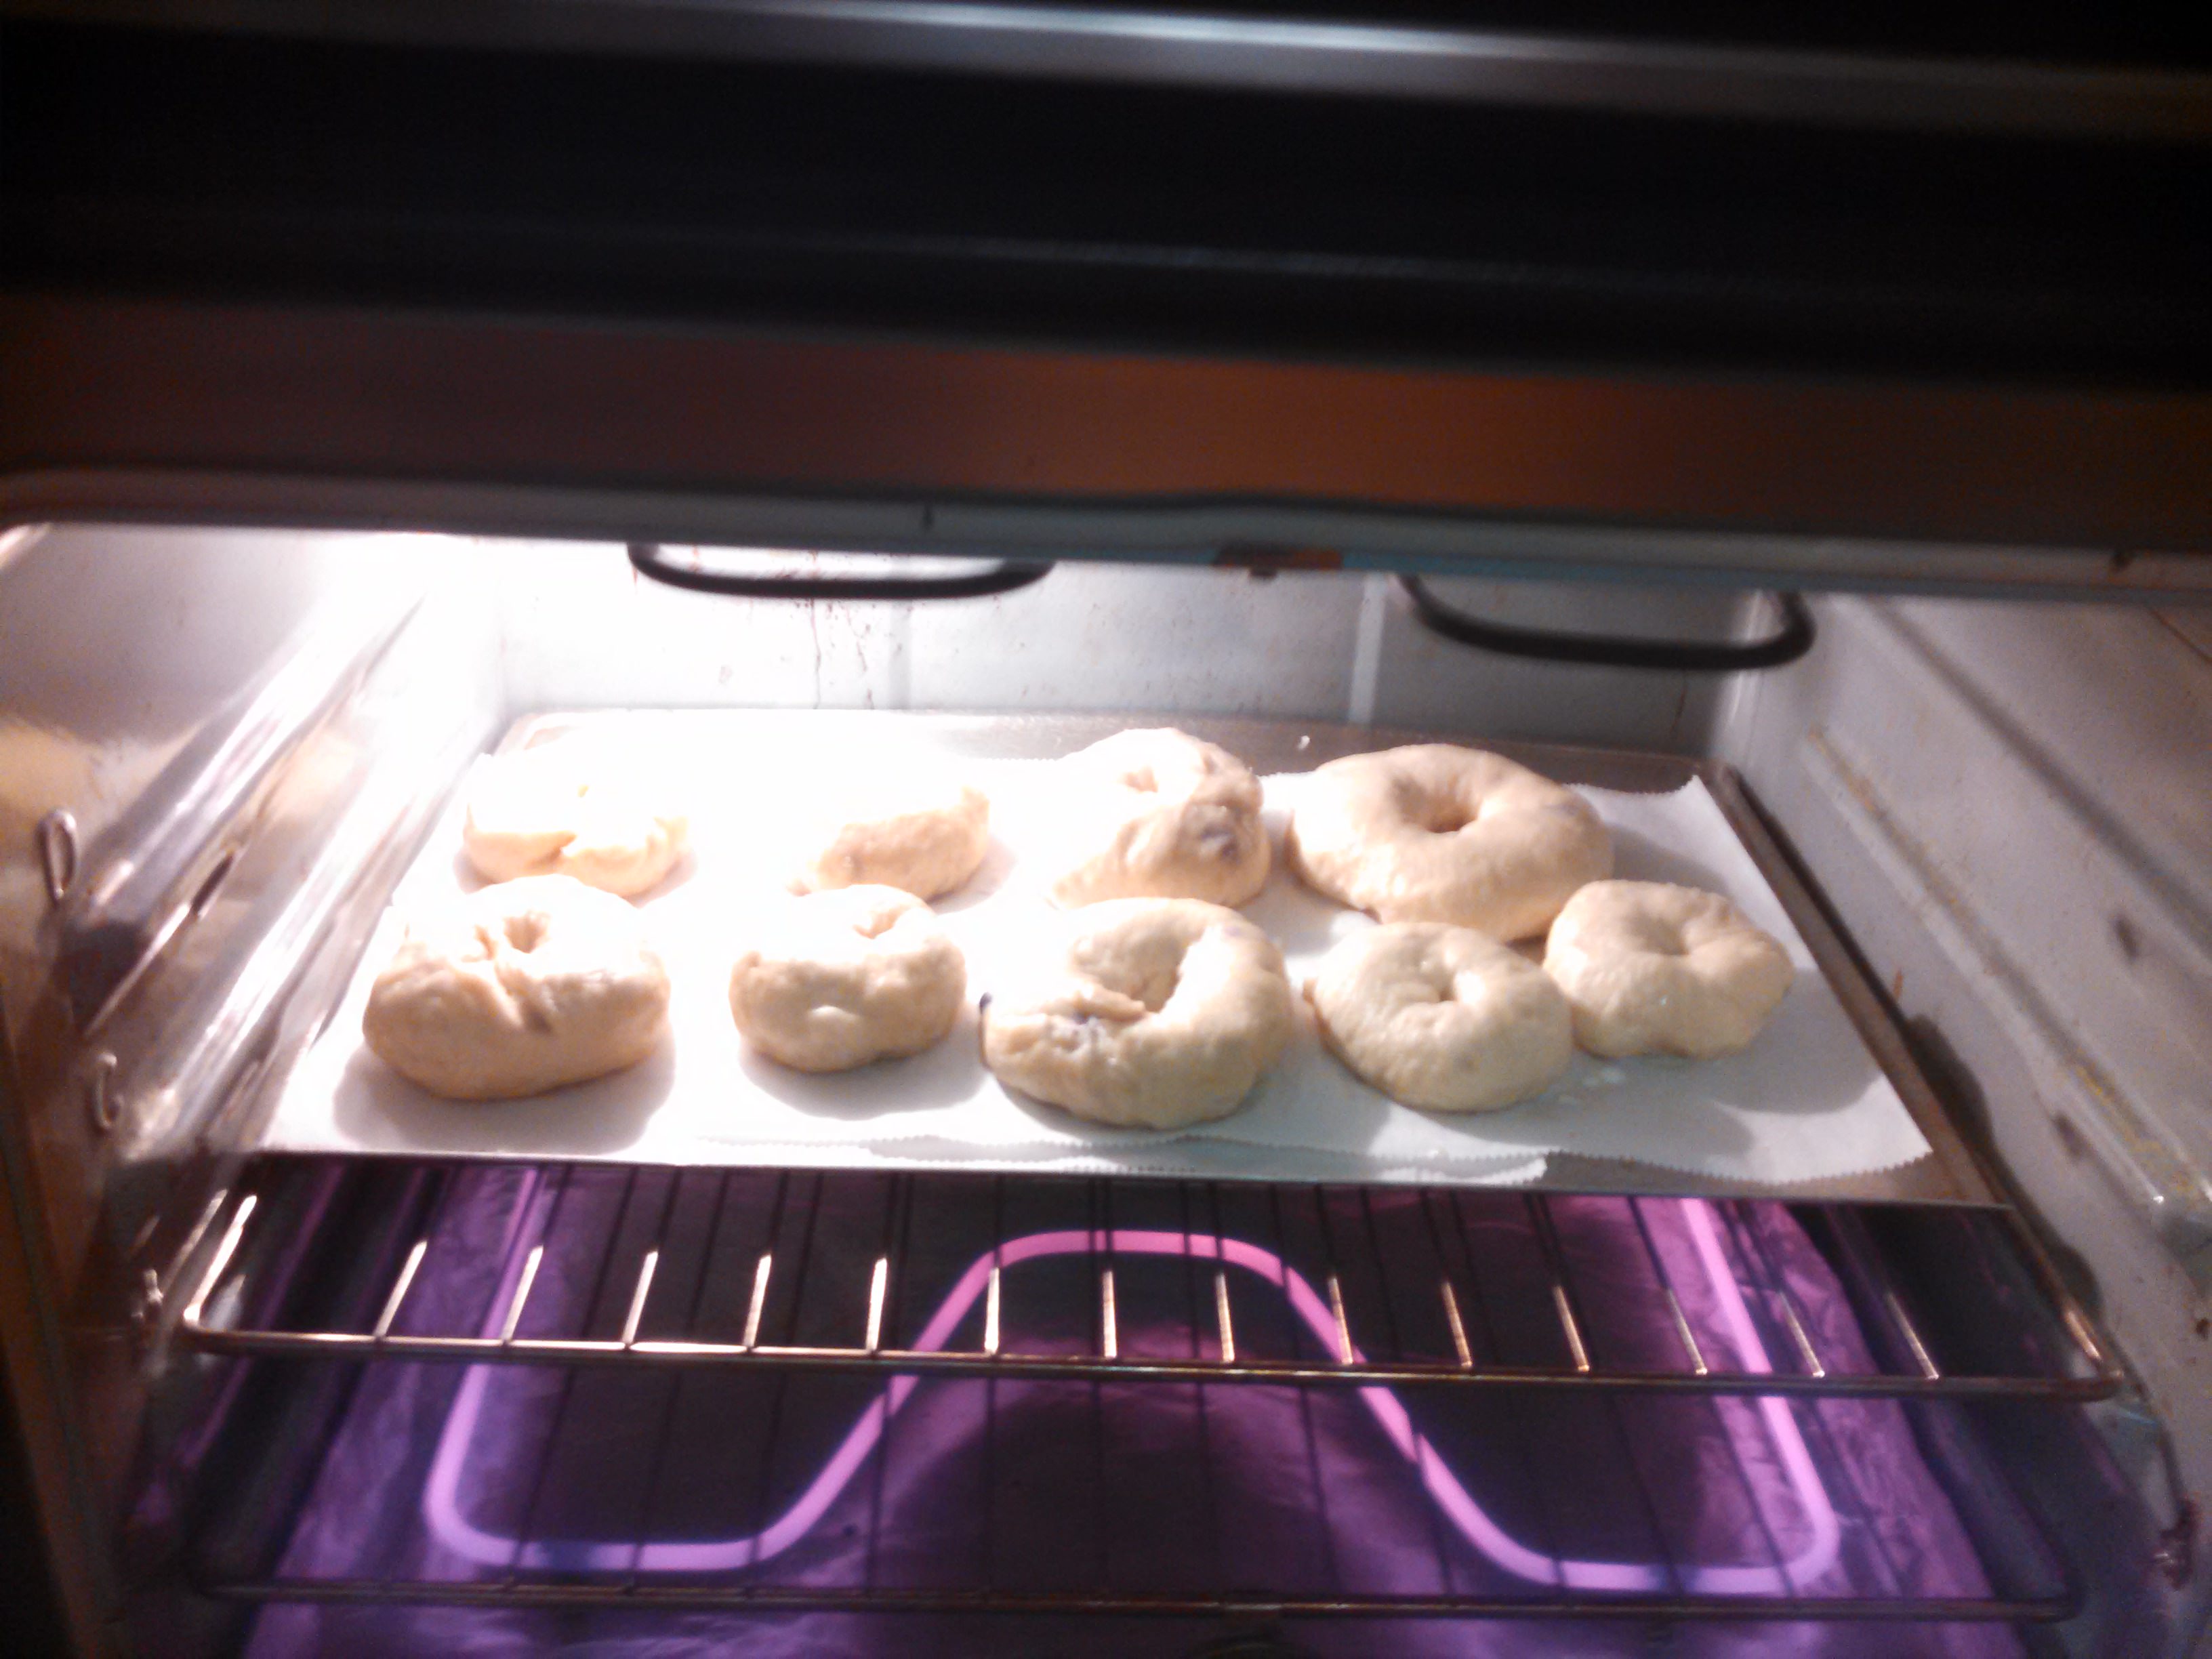 Baking the bagels